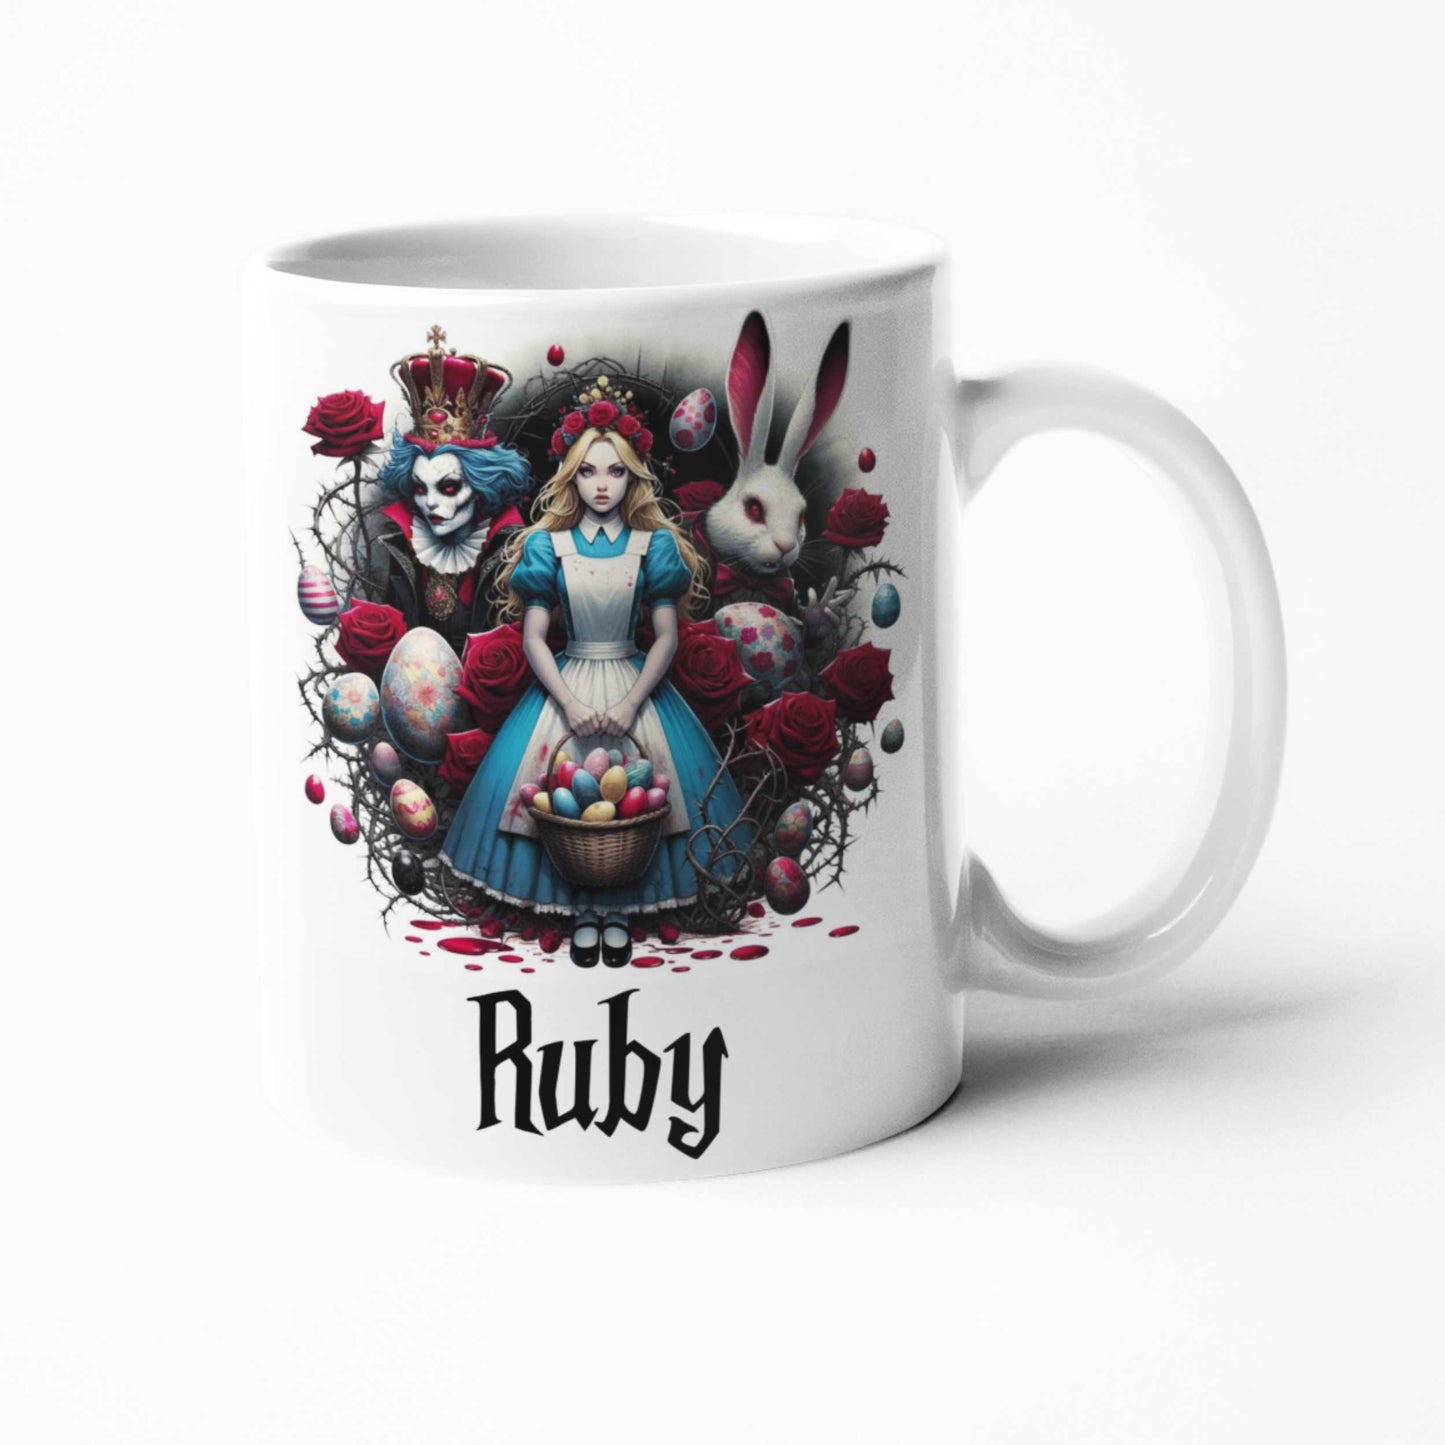 Easter Gifts | for Adults | for teens | Alice in Wonderland | Big Coffee Mugs | Gothic Gifts | Roses and Thorns | Alternative Gifts